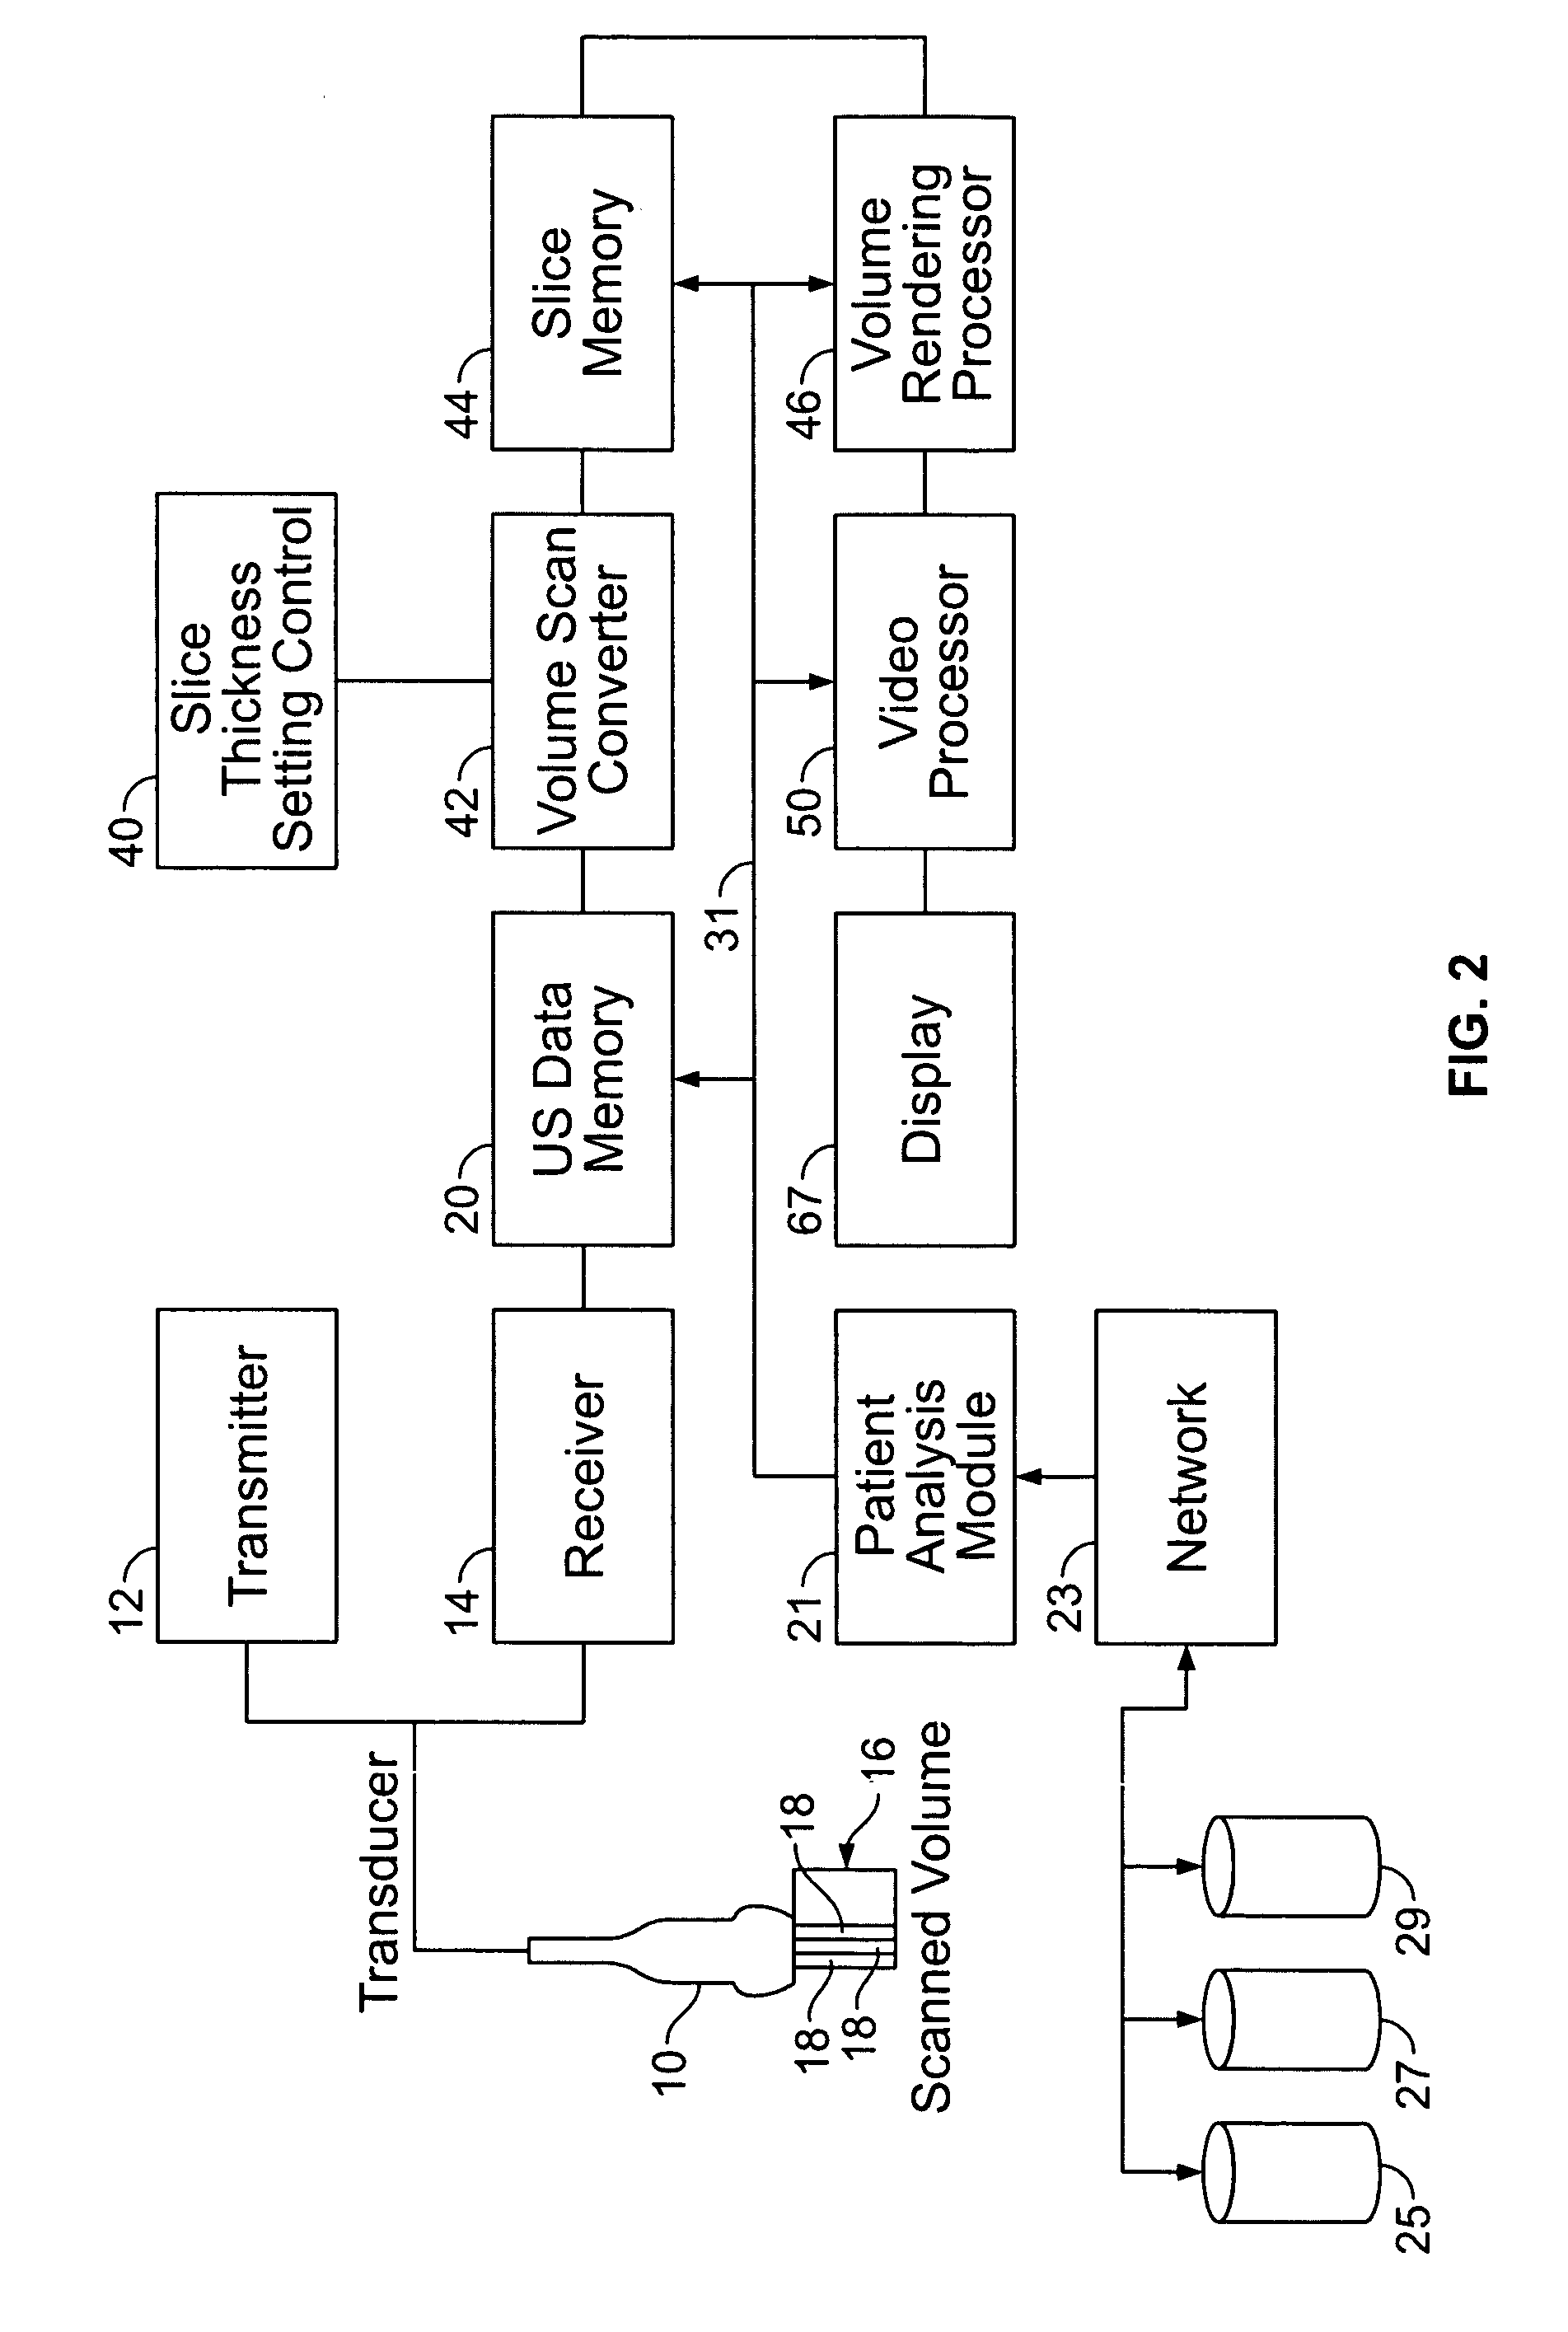 Method and apparatus for knowledge based diagnostic imaging